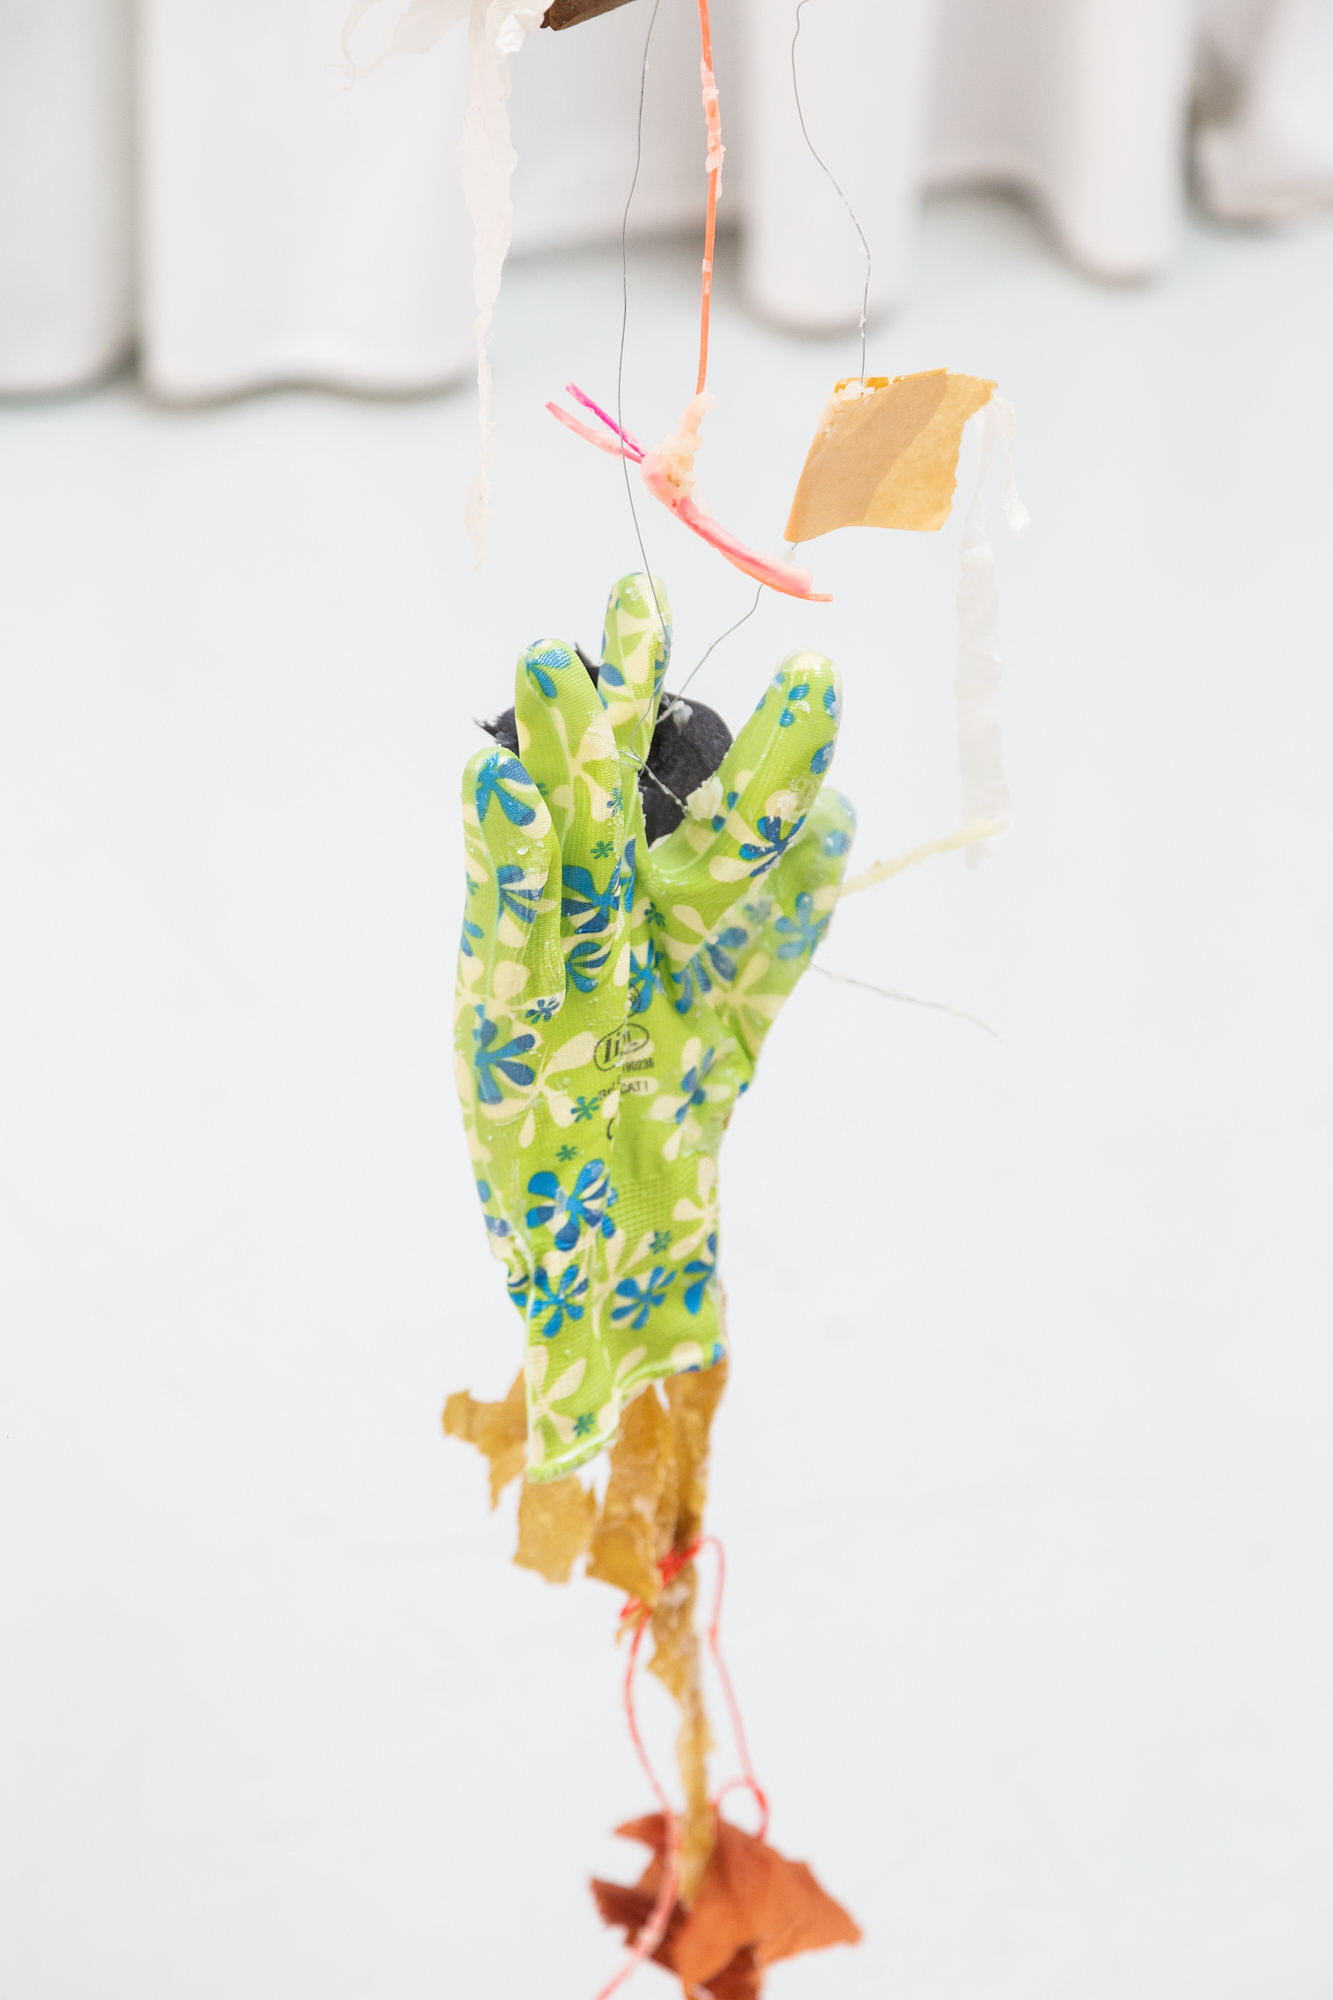 Installation View Detail, Reliquias II, Found objects, Aluminium wire, Paper and Wax, 3m high, 2022